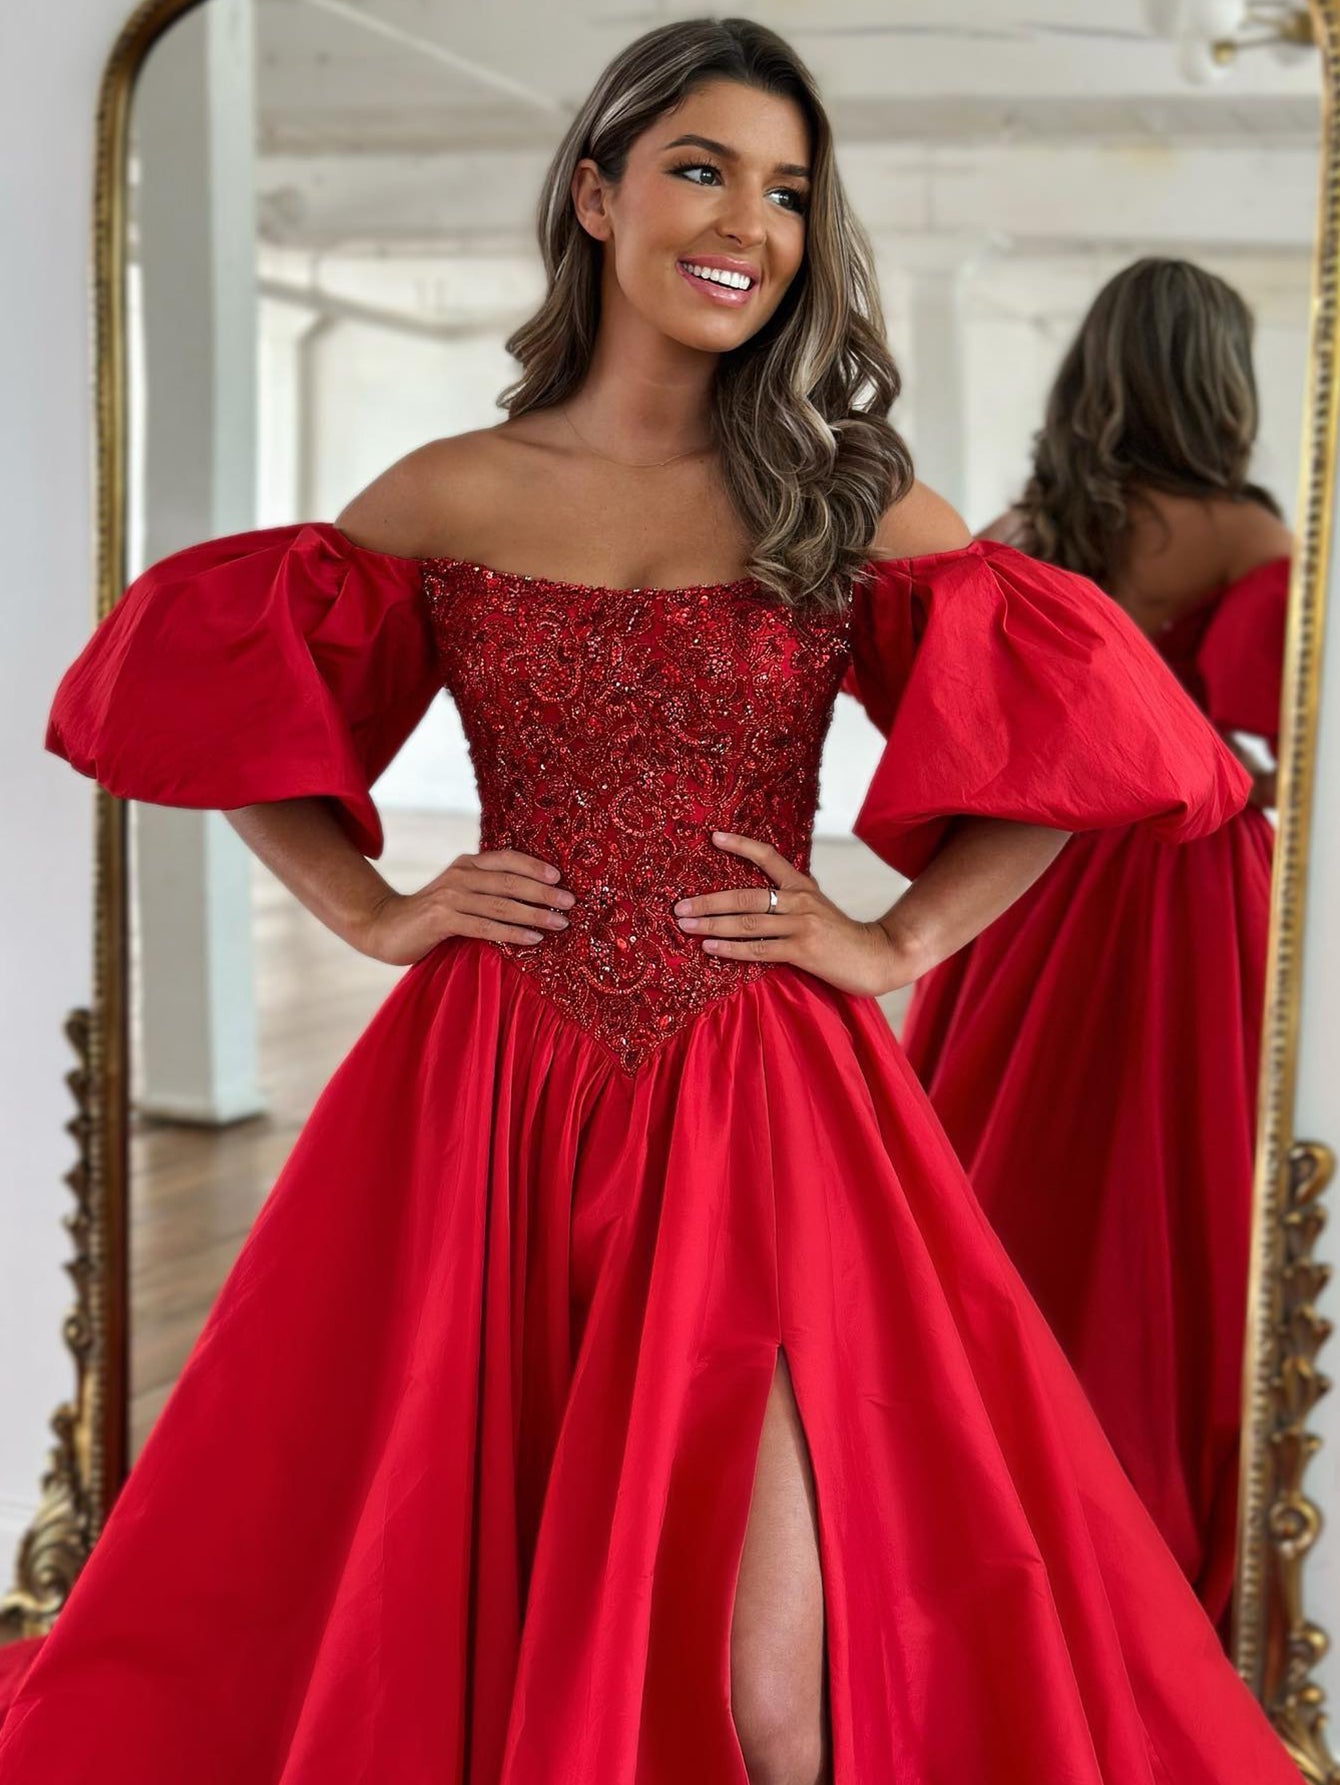 Tina Holly - Valhalla red ball gown